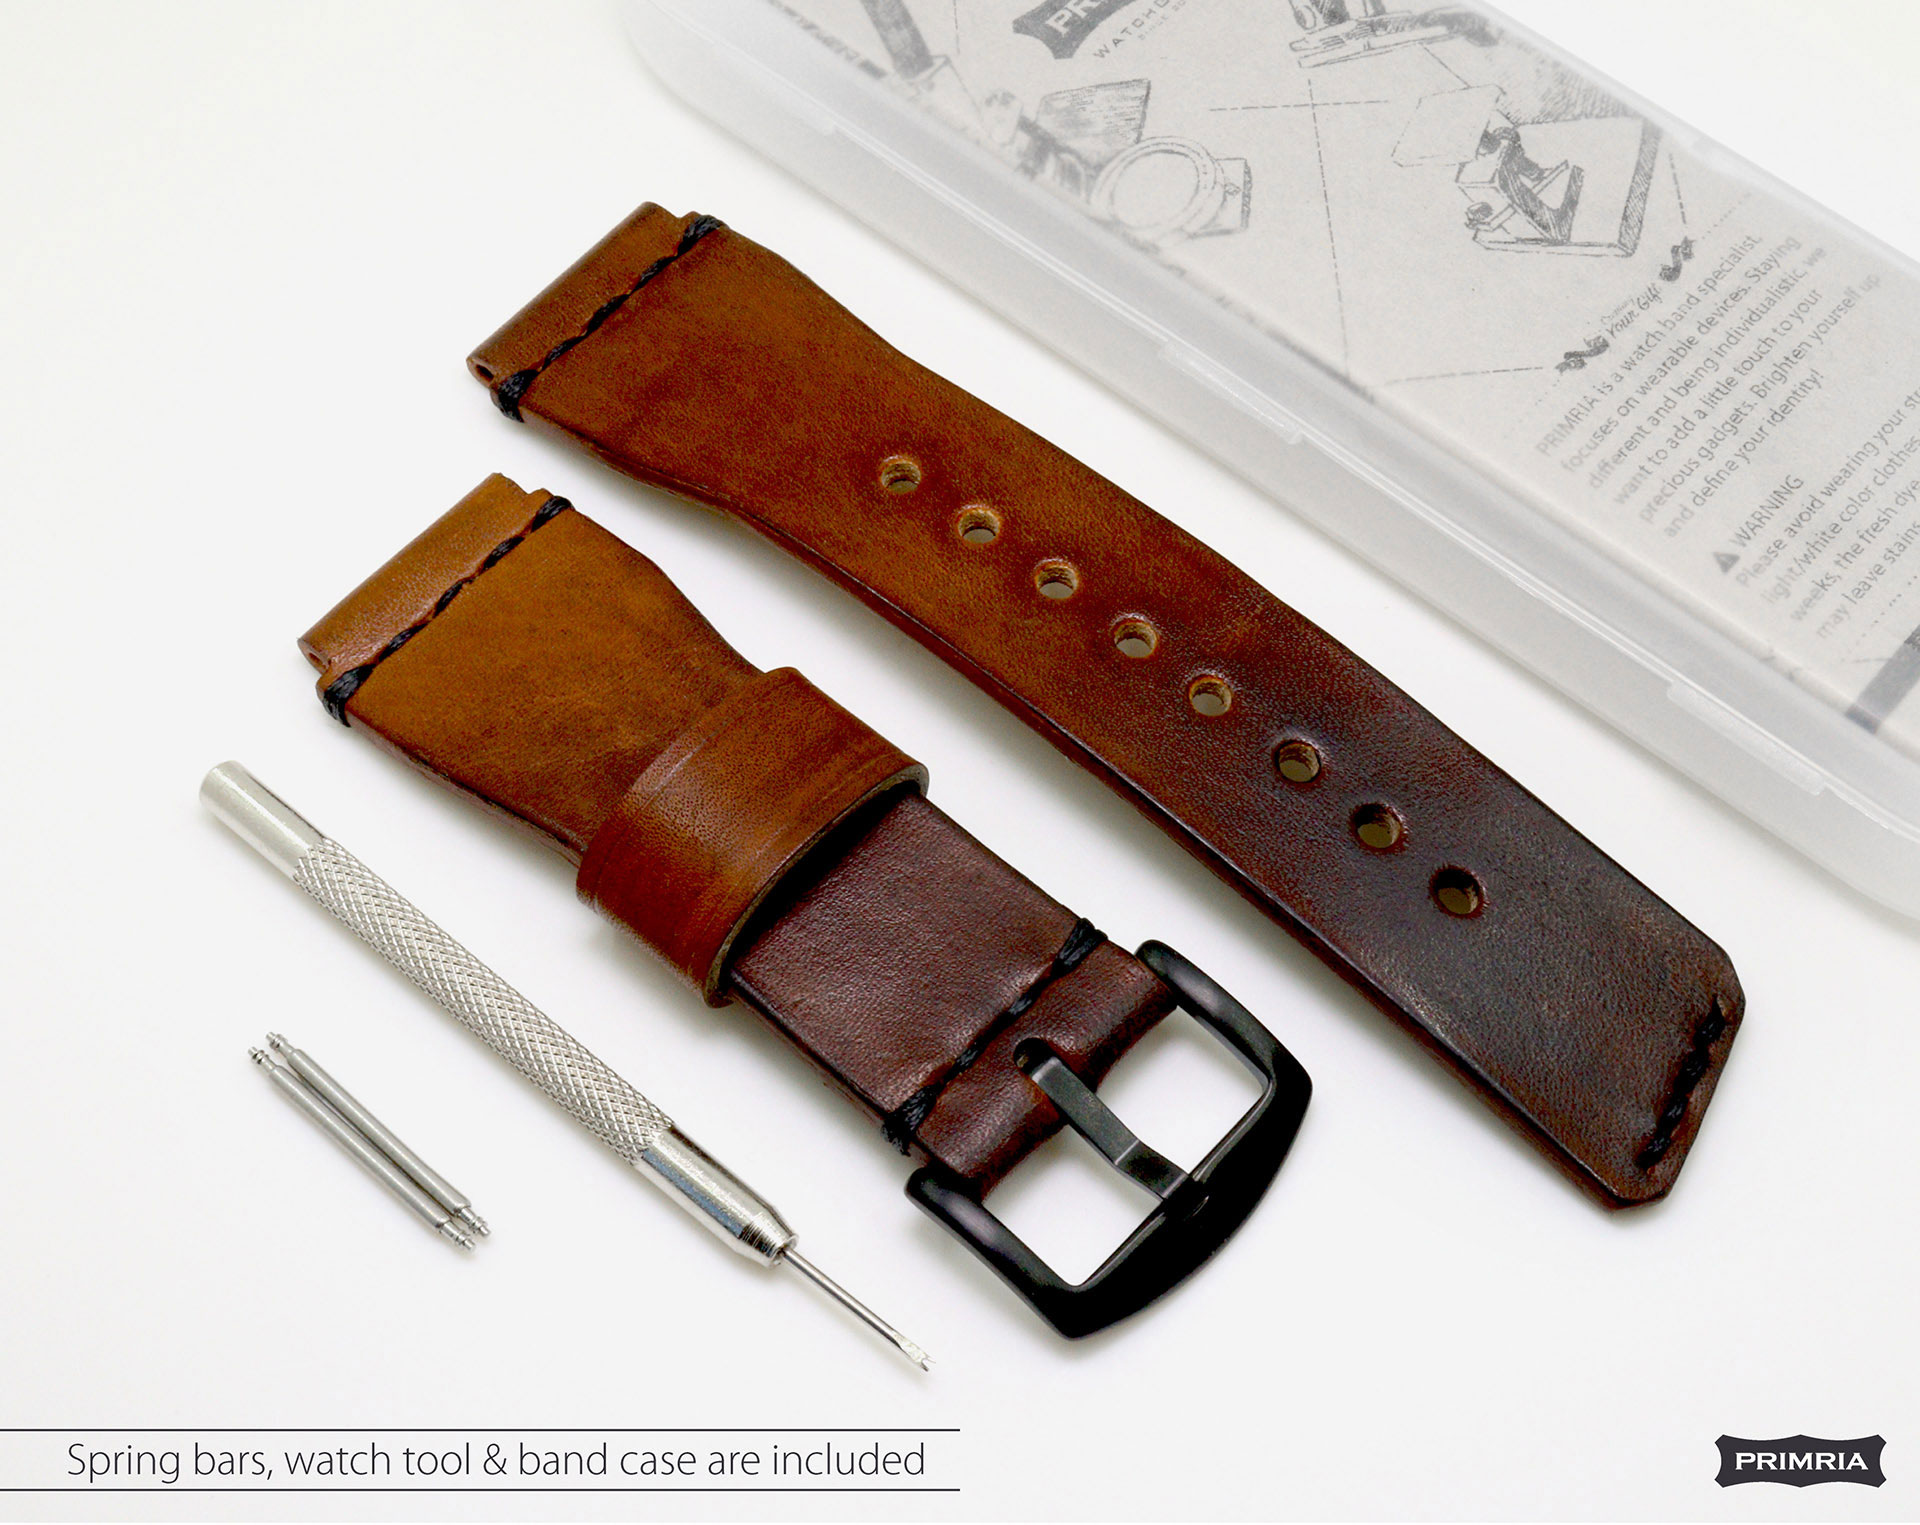 fax Latterlig Brobrygge Saddle Leather Watch Straps – Pilot Type D : Coffee Brown – 24mm 25mm 26mm  - PRIMRIA Watch Bands & Straps